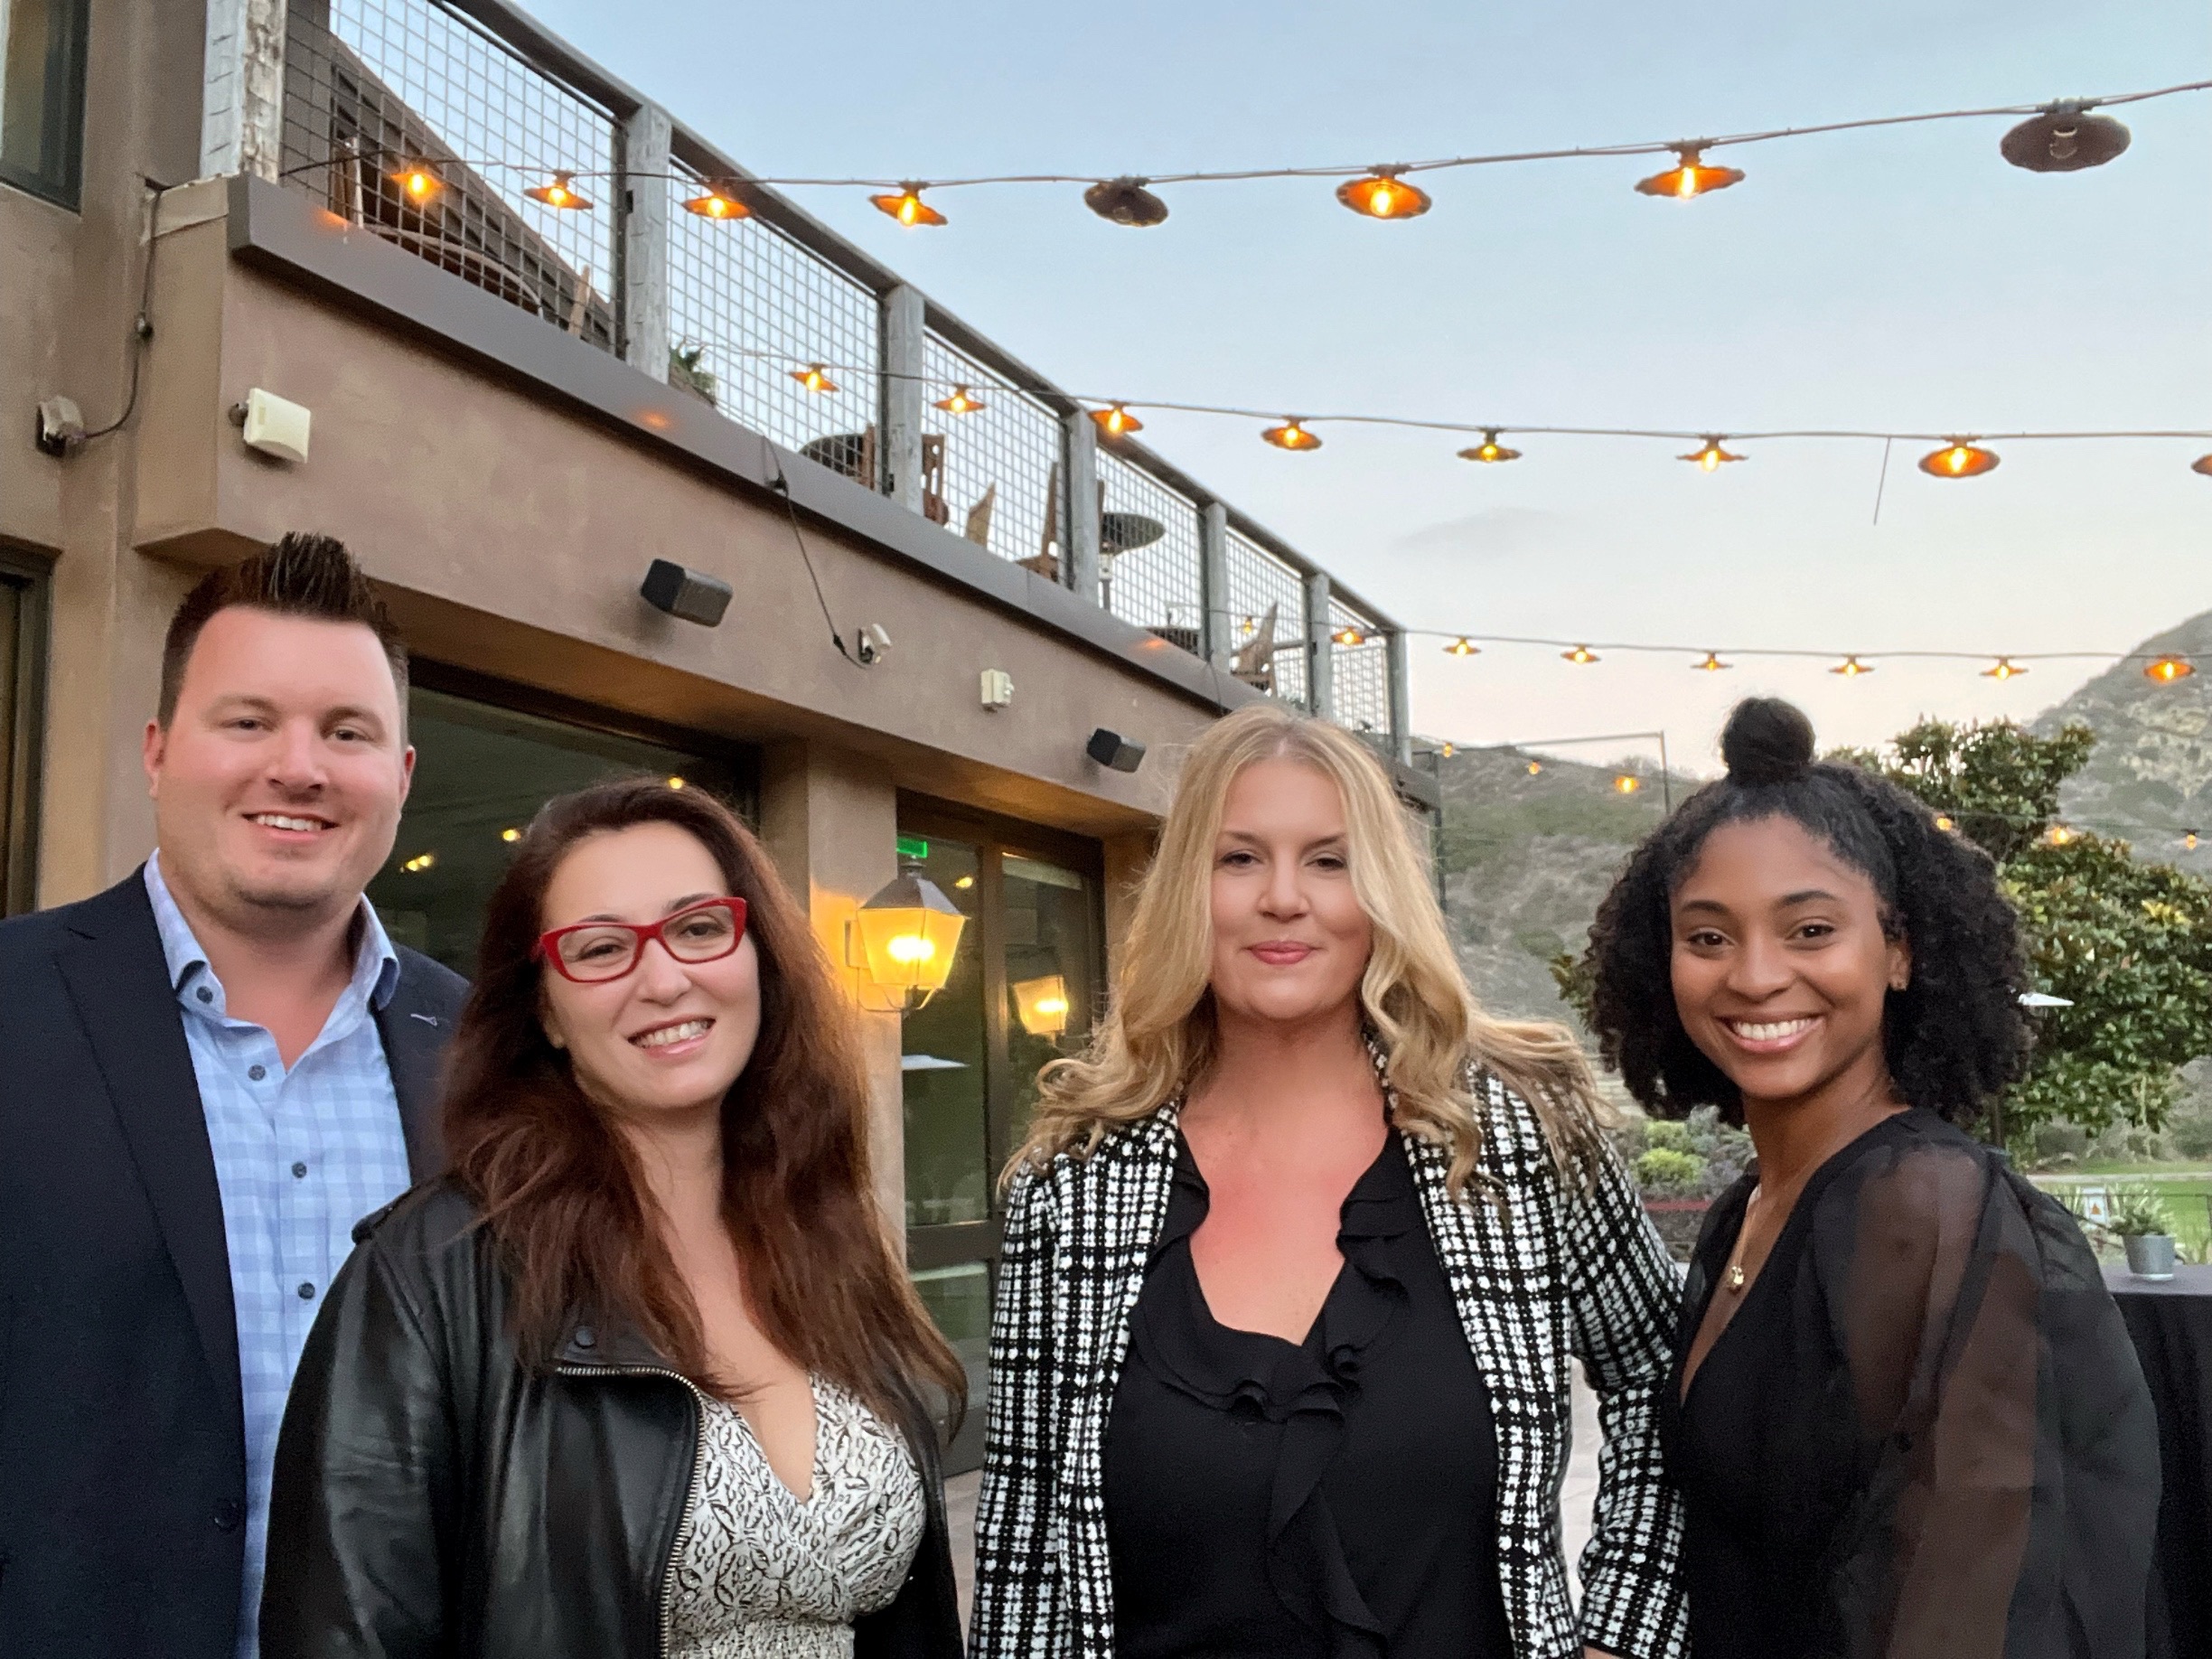 Forbes Exchange- Angela Delmedico, Elev8 Consulting Group- Laguna Beach- Forbes Business Council